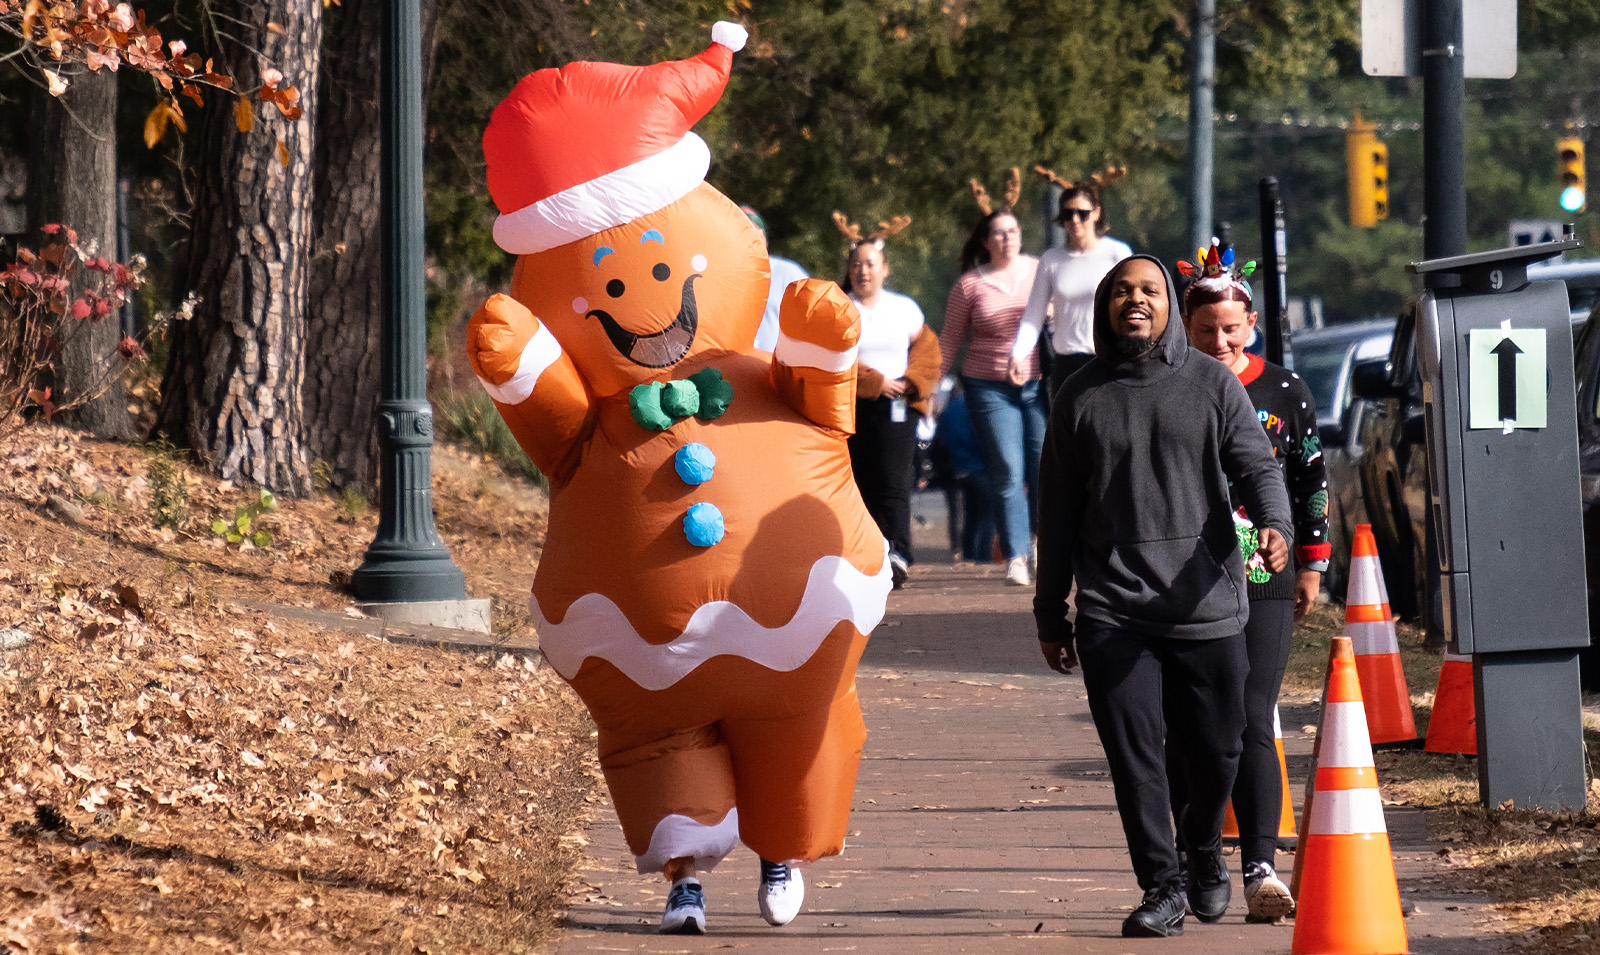 A man smiling as a jogger dressed up as a Gingerbread Man passes by him.